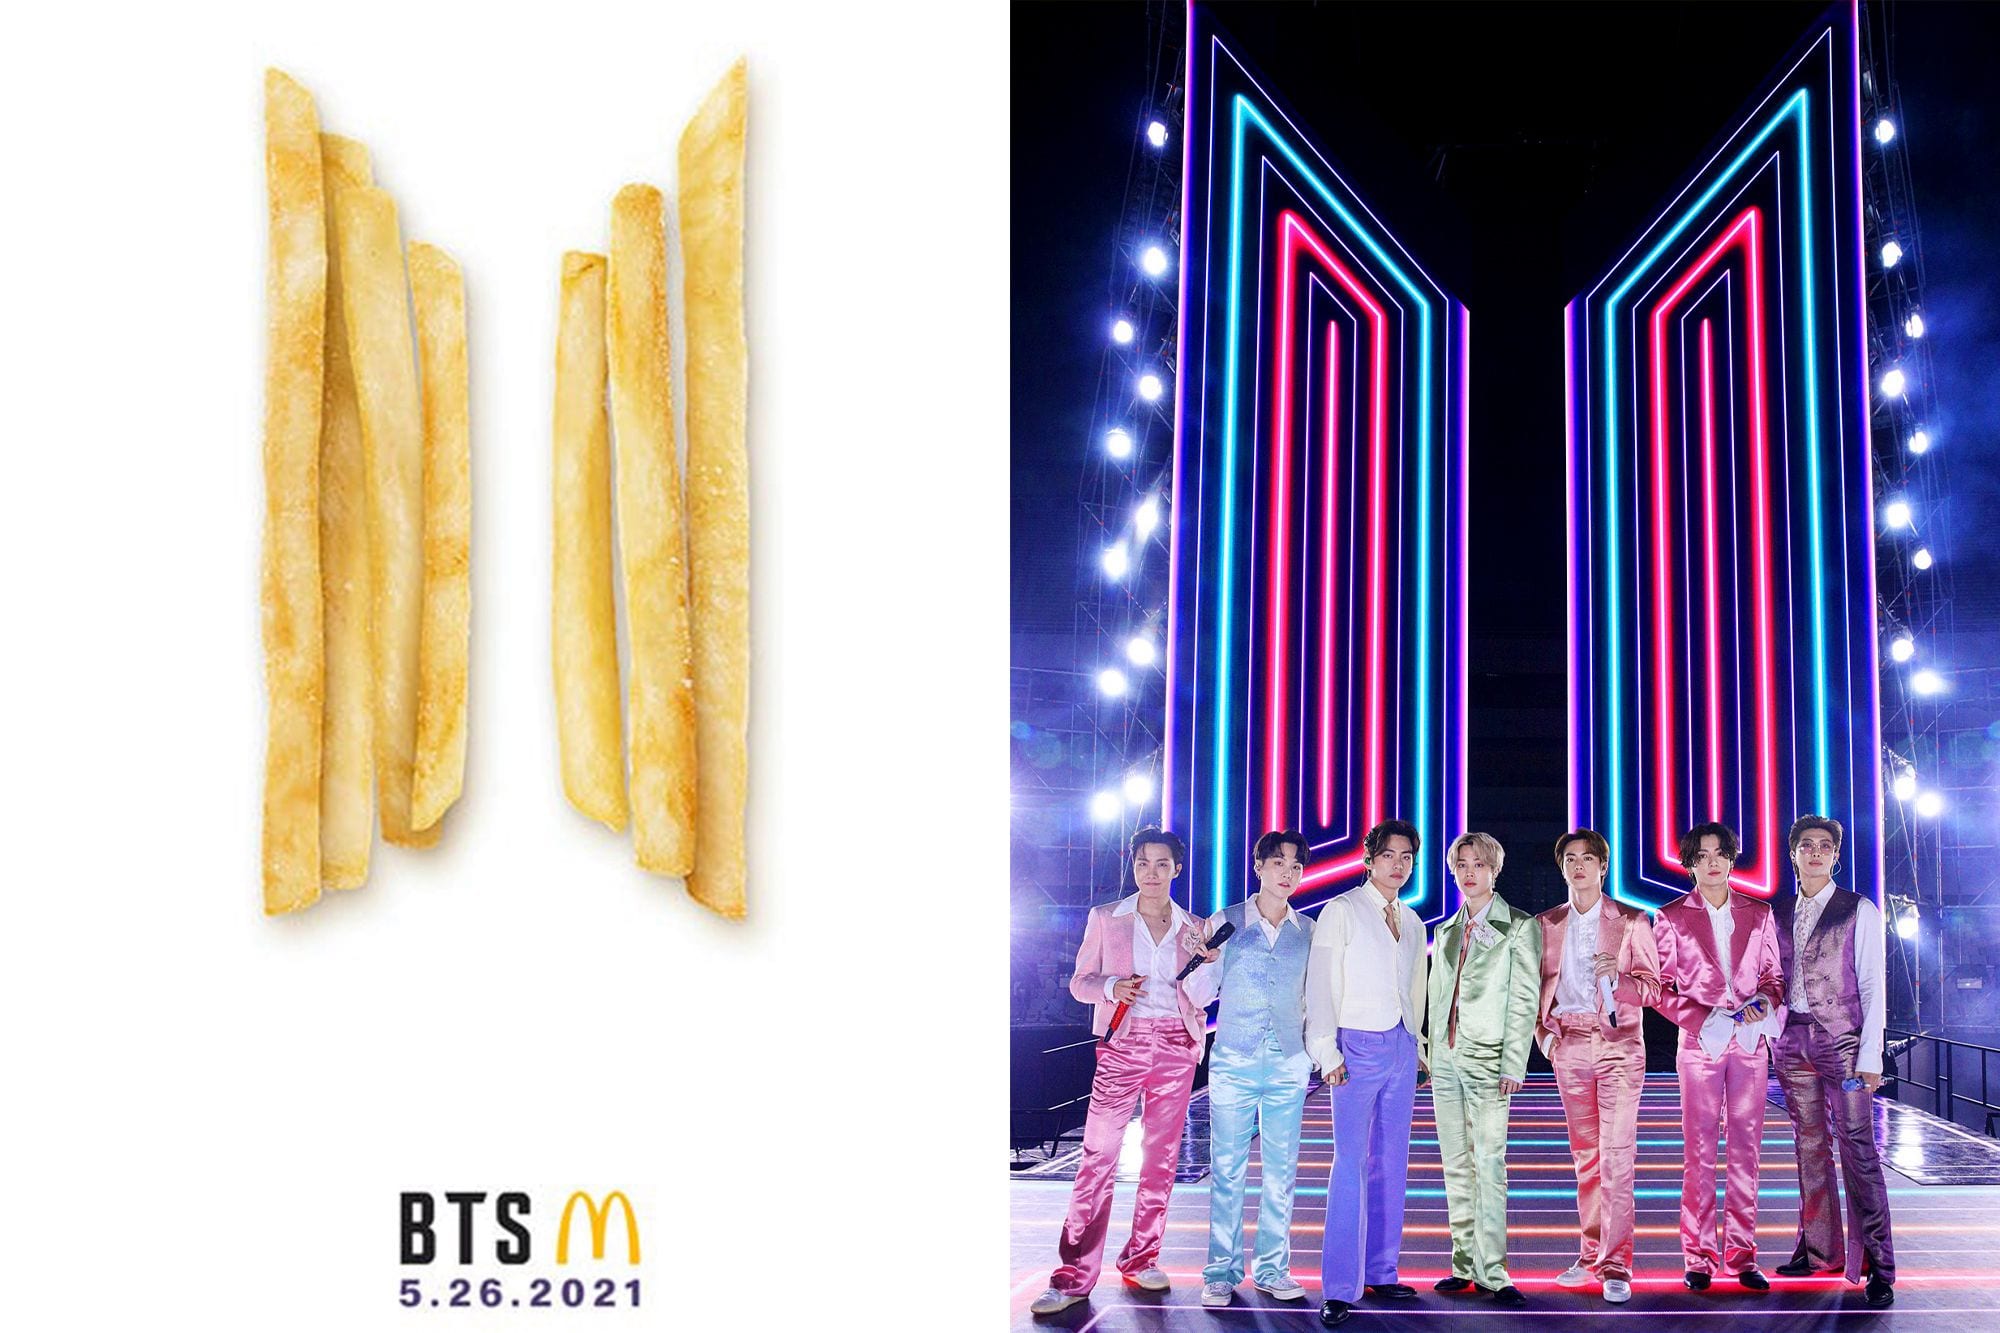 A New 'BTS' Version Menu is Coming To McDonald's - Part of ...